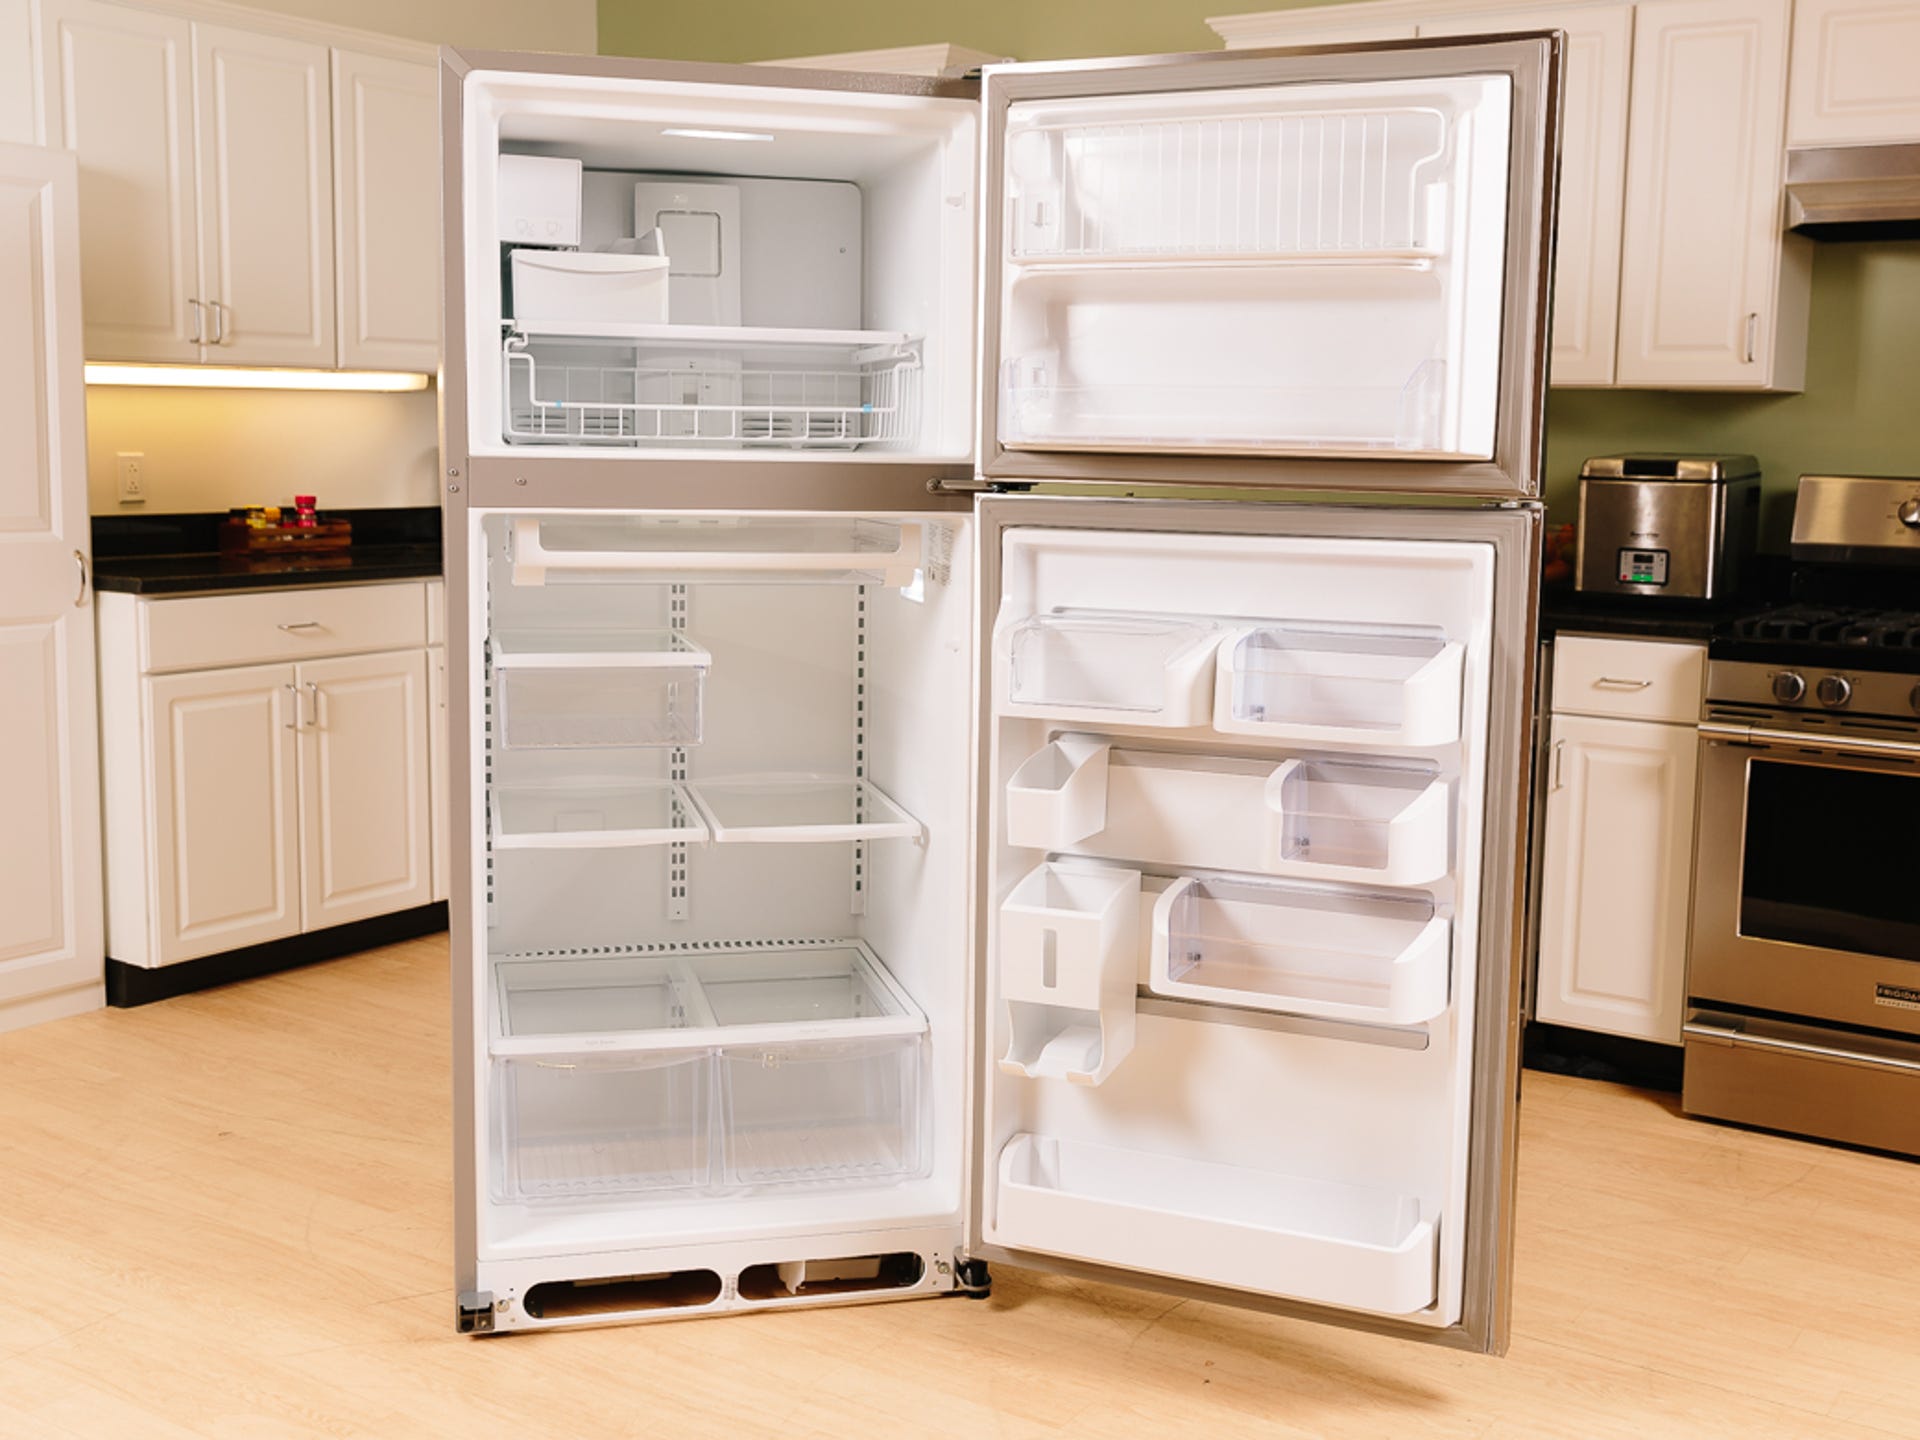 Frigidaire Appliances Reviewed  Top Rated Frigidaire Models